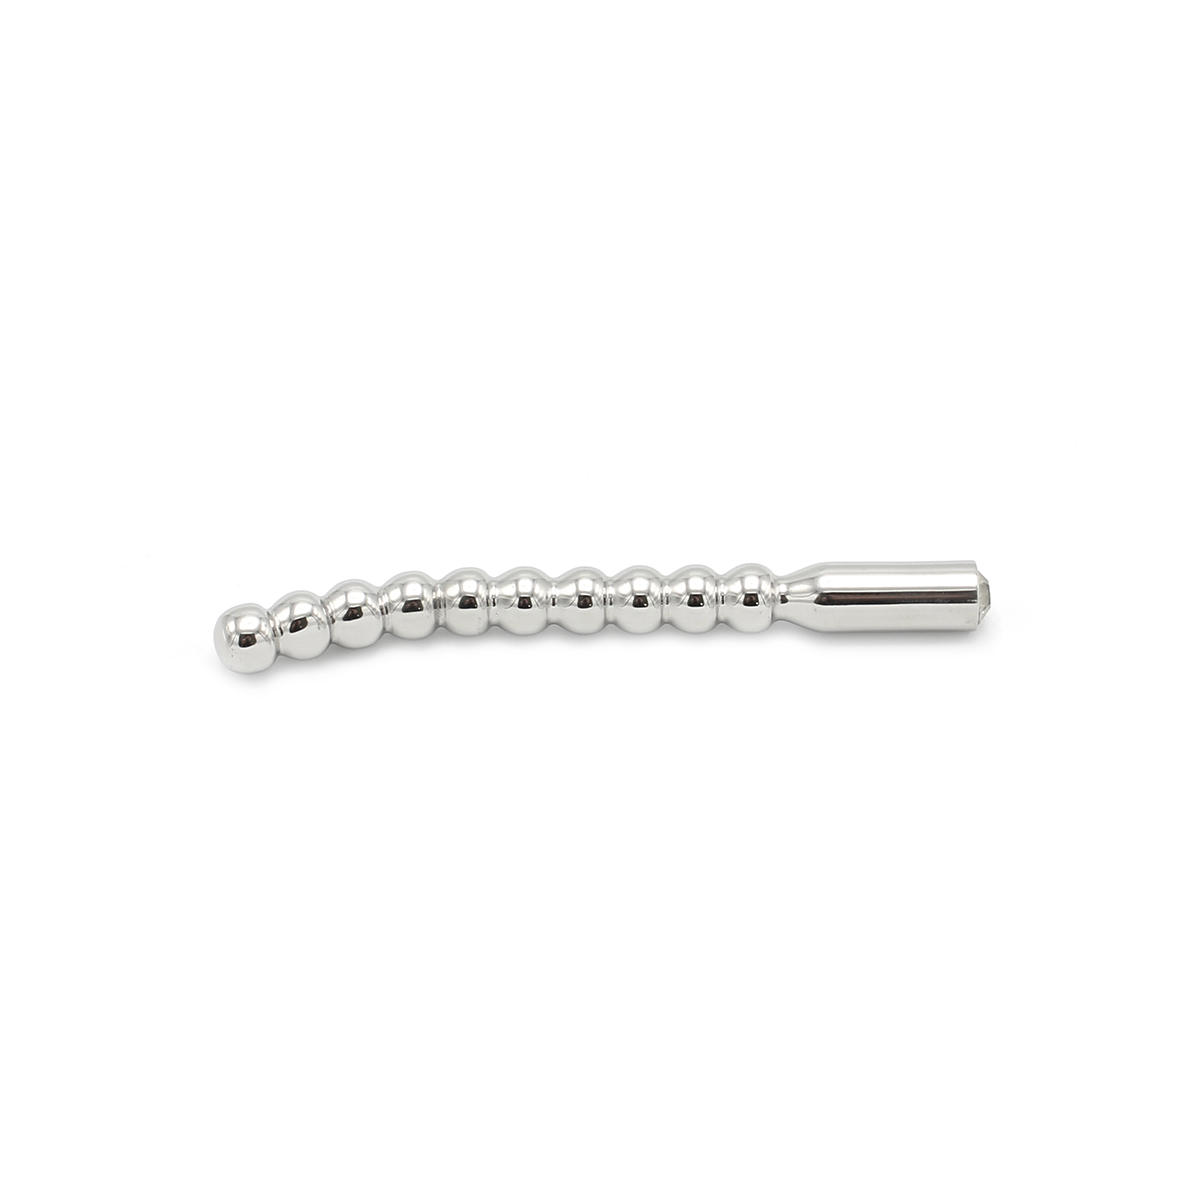 Solid-Penis-Plug-Beaded-Curved-10-mm-OPR-2960101-1